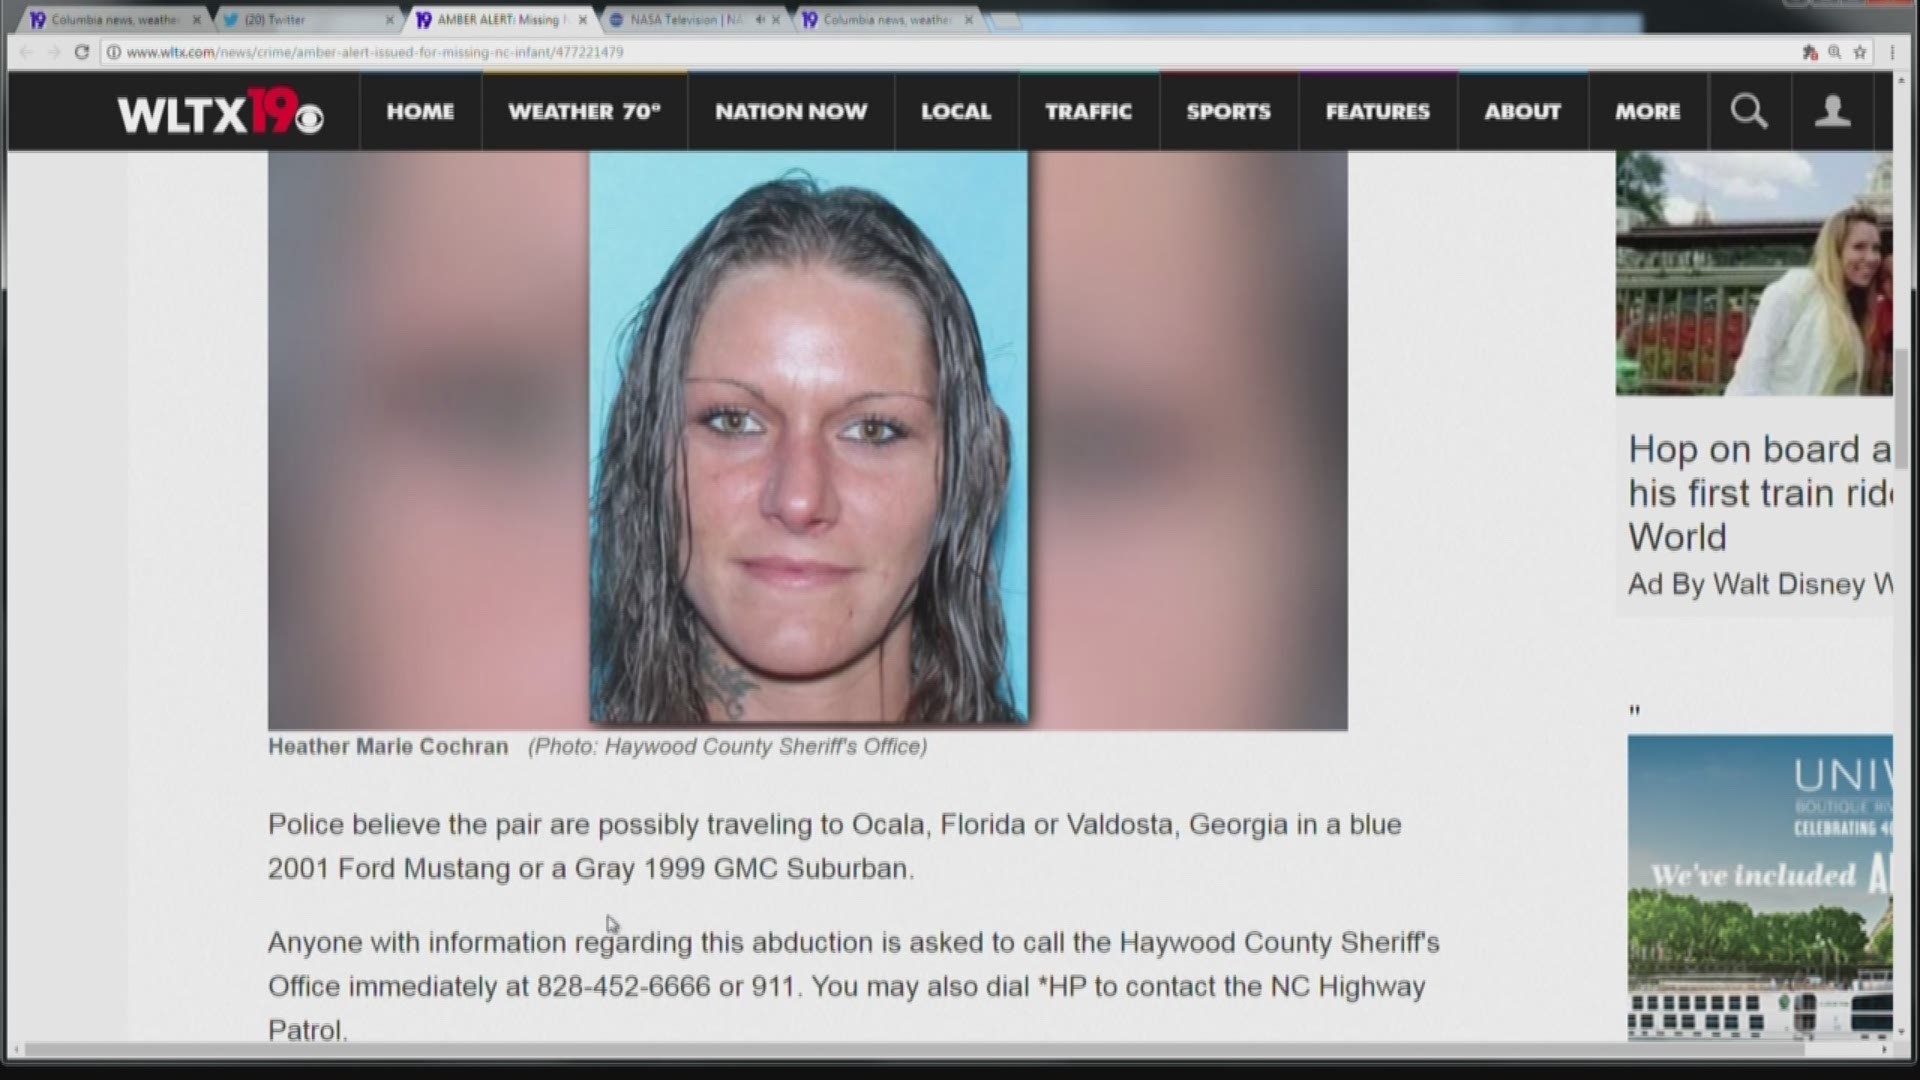 Police believe the pair are possibly traveling to Ocala, Florida or Valdosta, Georgia in a blue 2001 Ford Mustang or a Gray 1999 GMC Suburban.  